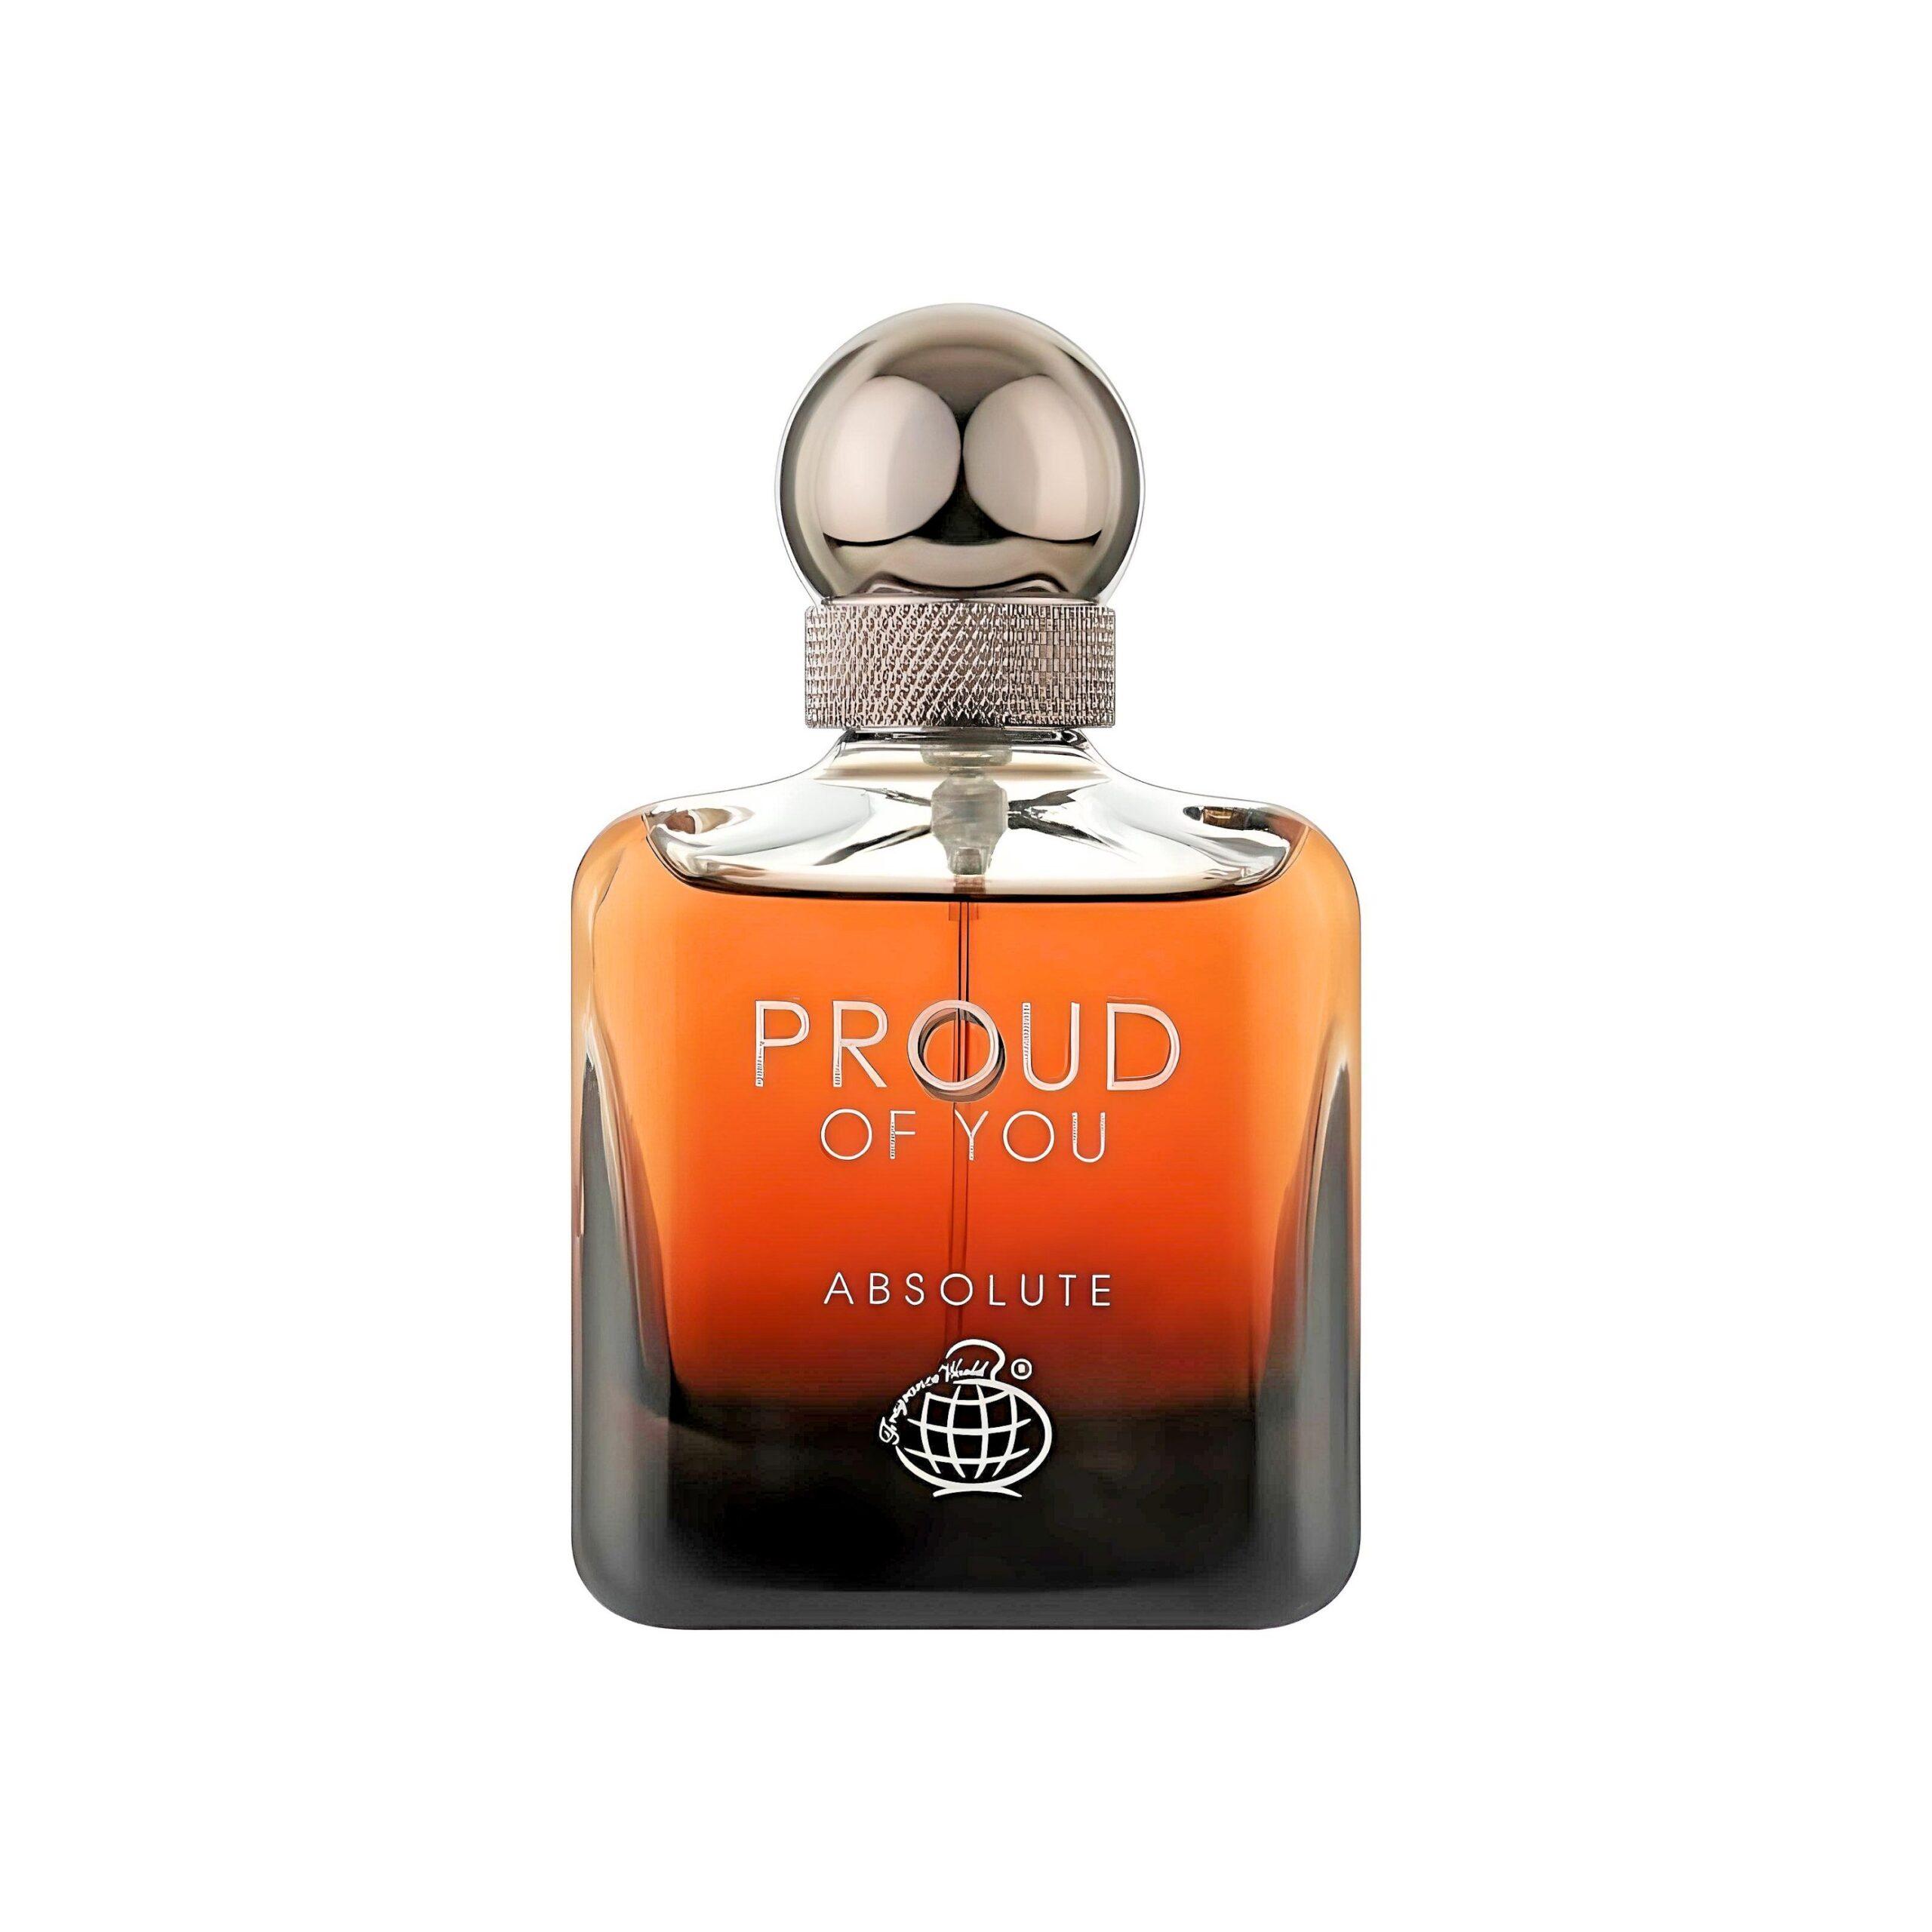 Proud Of You Absolute Perfume 100Ml Edp By Fragrance World